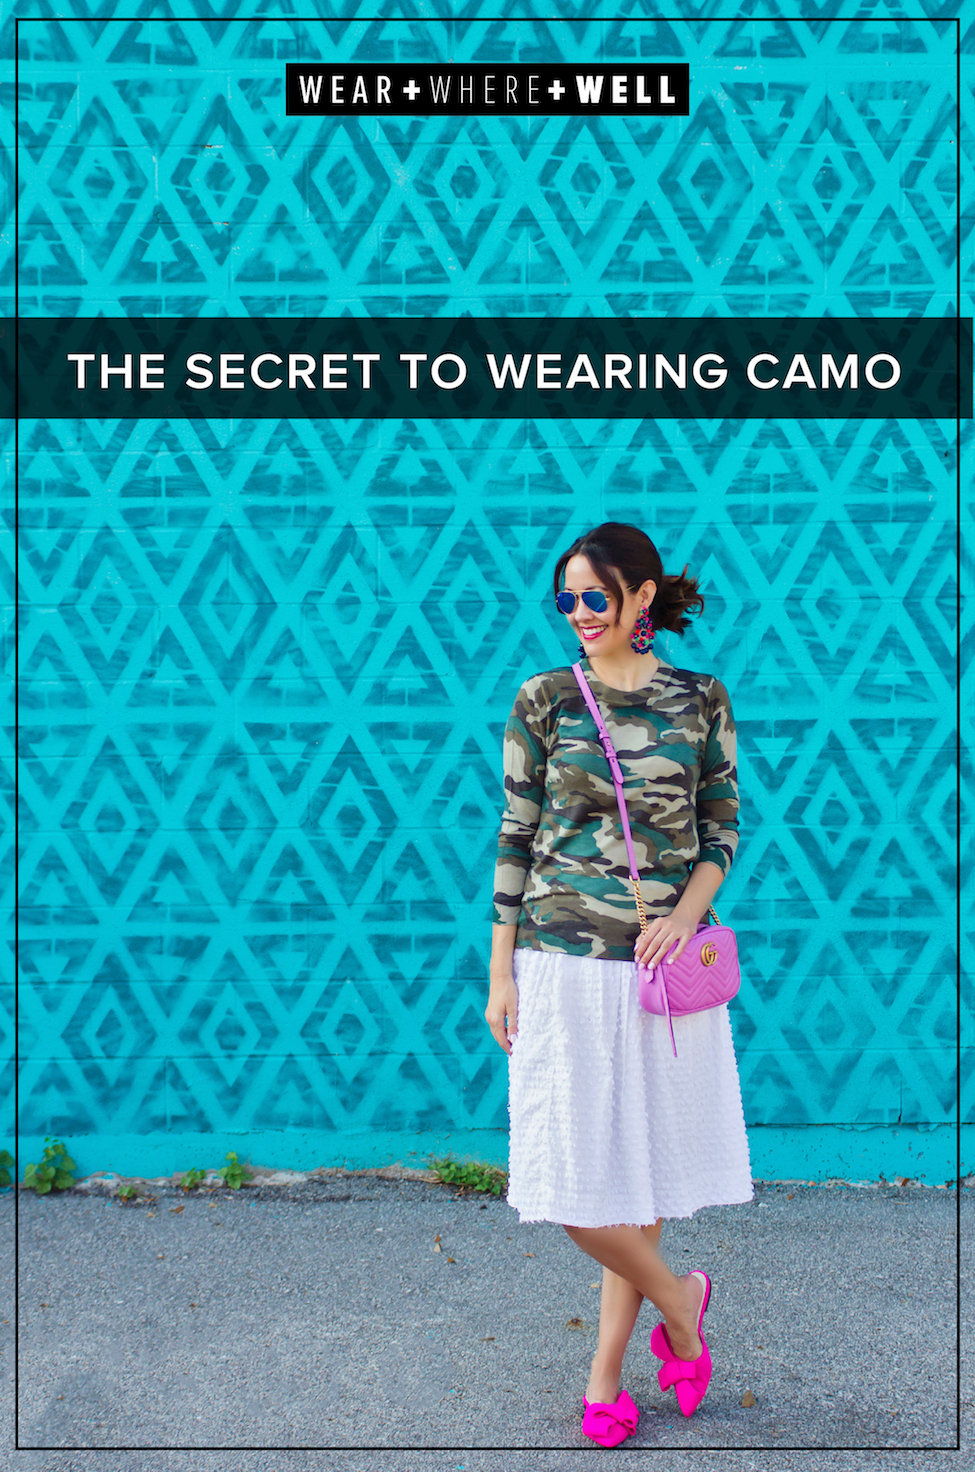 Buy > pink and camo outfits > in stock